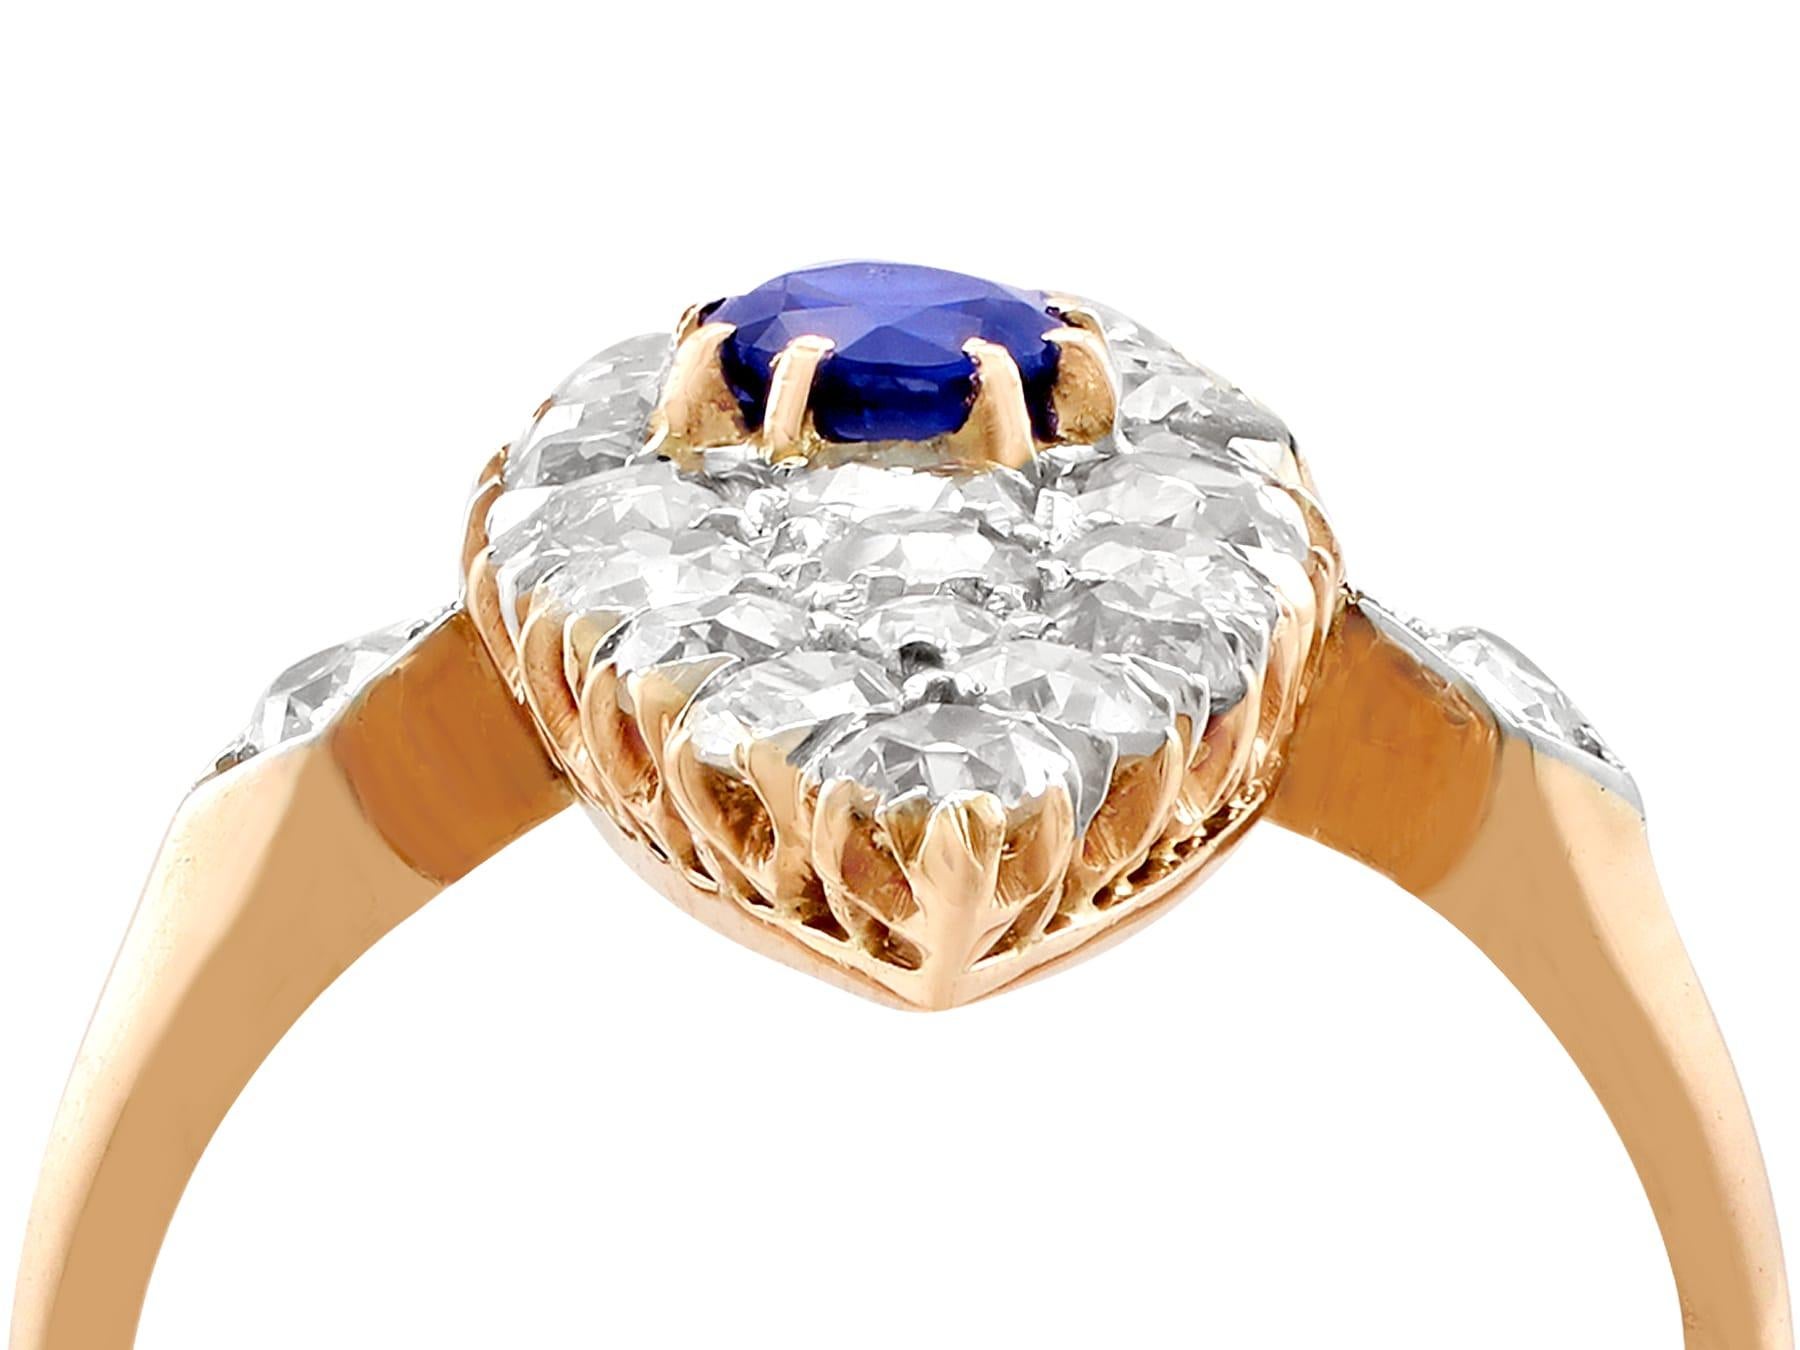 A stunning 0.42 carat sapphire and 2.92 carat diamond, 18 karat yellow gold and 18k white gold set marquise ring; part of our diverse antique jewelry collections

The stunning, fine and impressive sapphire and diamond marquise ring has been crafted